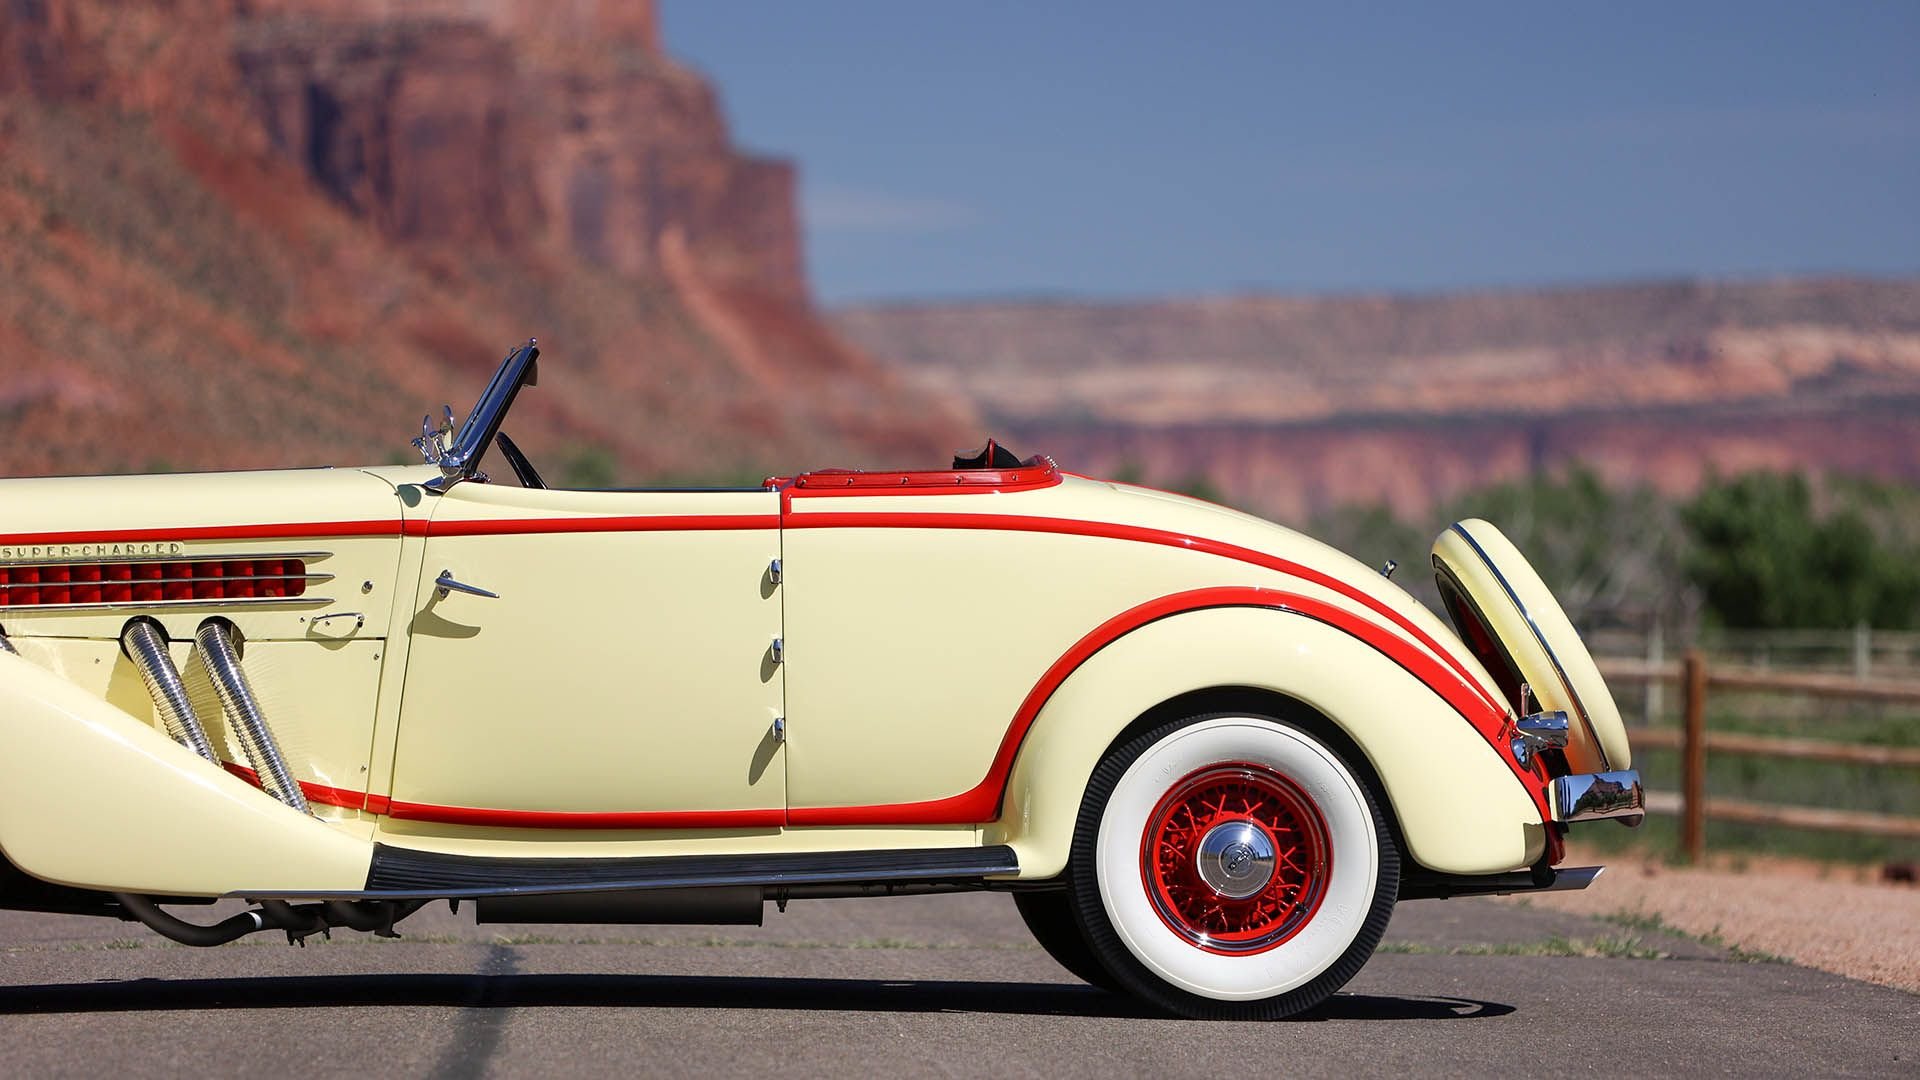 Broad Arrow Auctions | 1936 Auburn 852 Supercharged Cabriolet